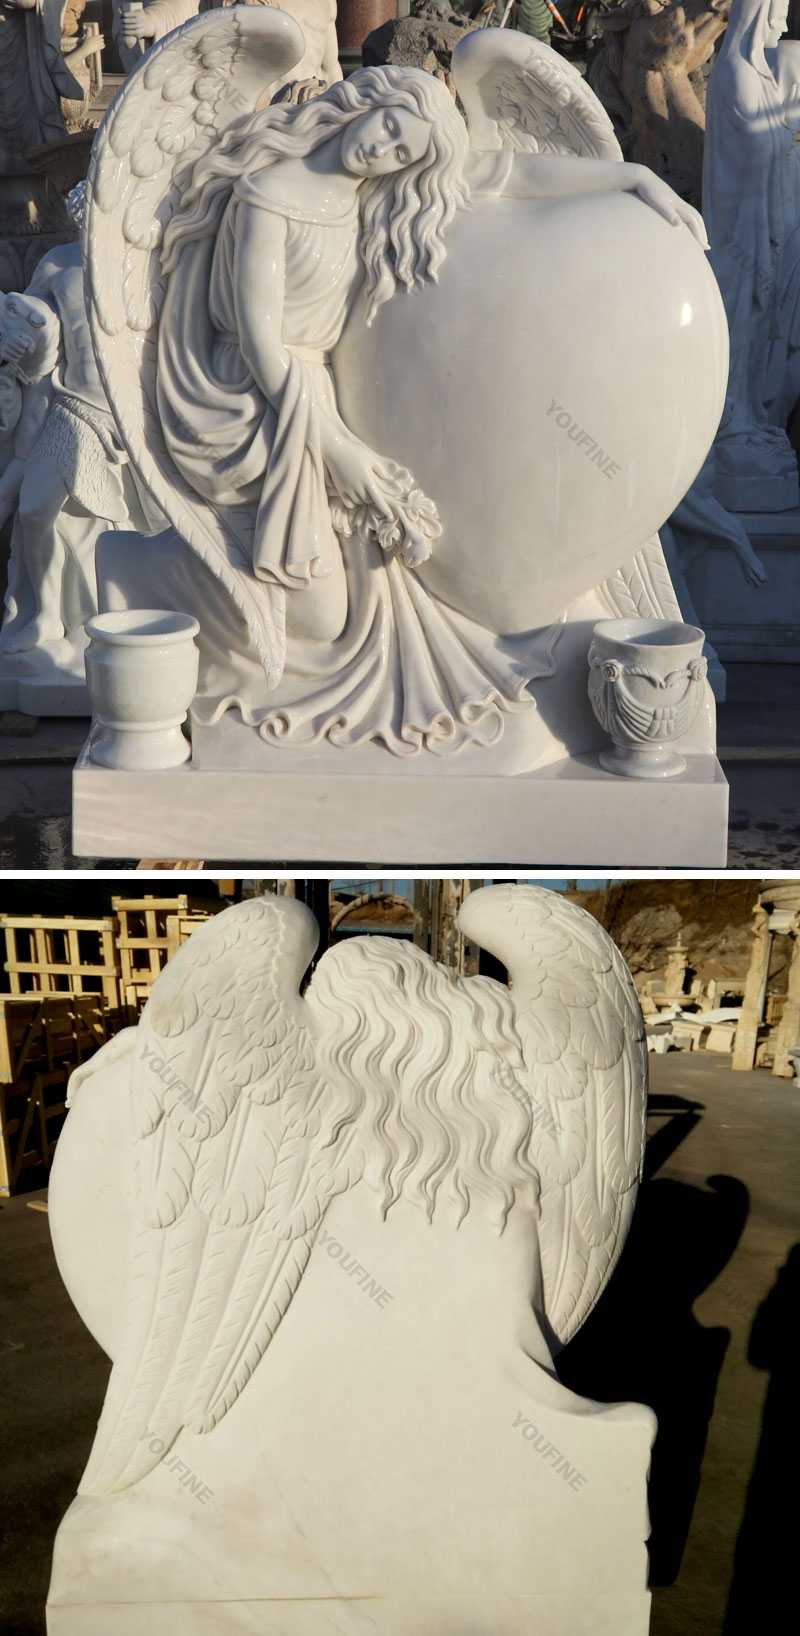 Details of grief angel with heart marble headstone monuments designs for sale